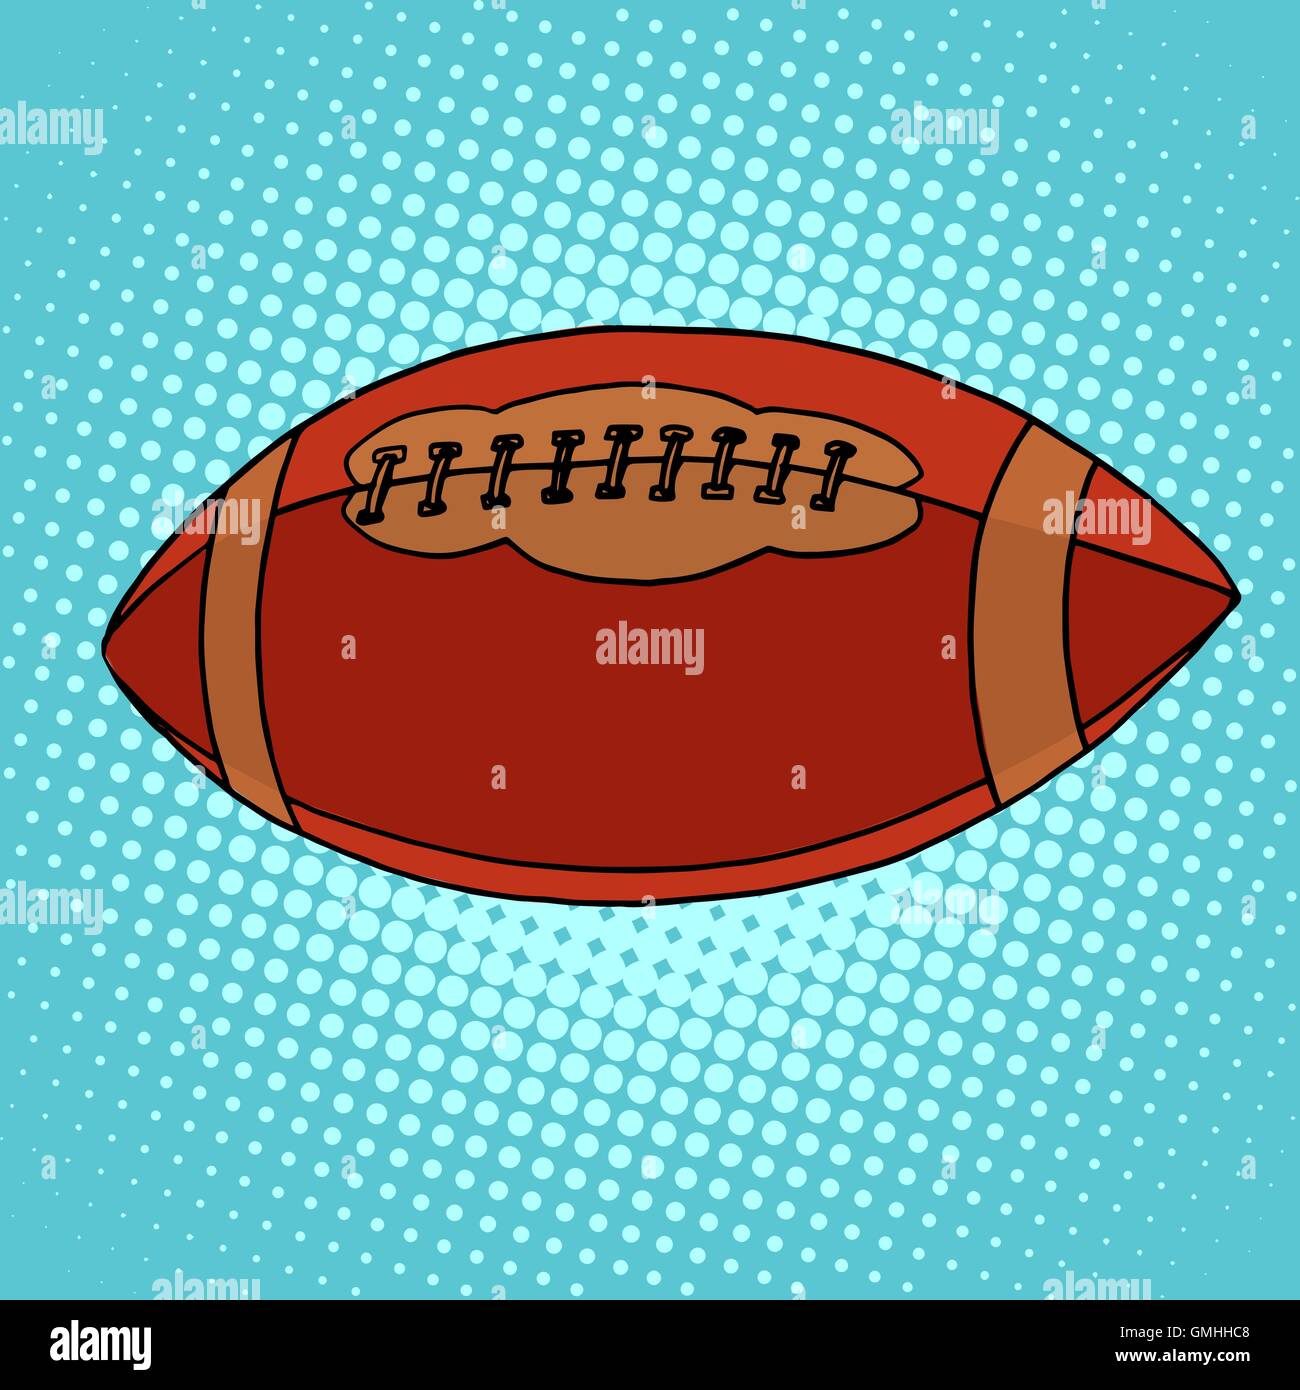 Ball for Rugby or American football Stock Vector